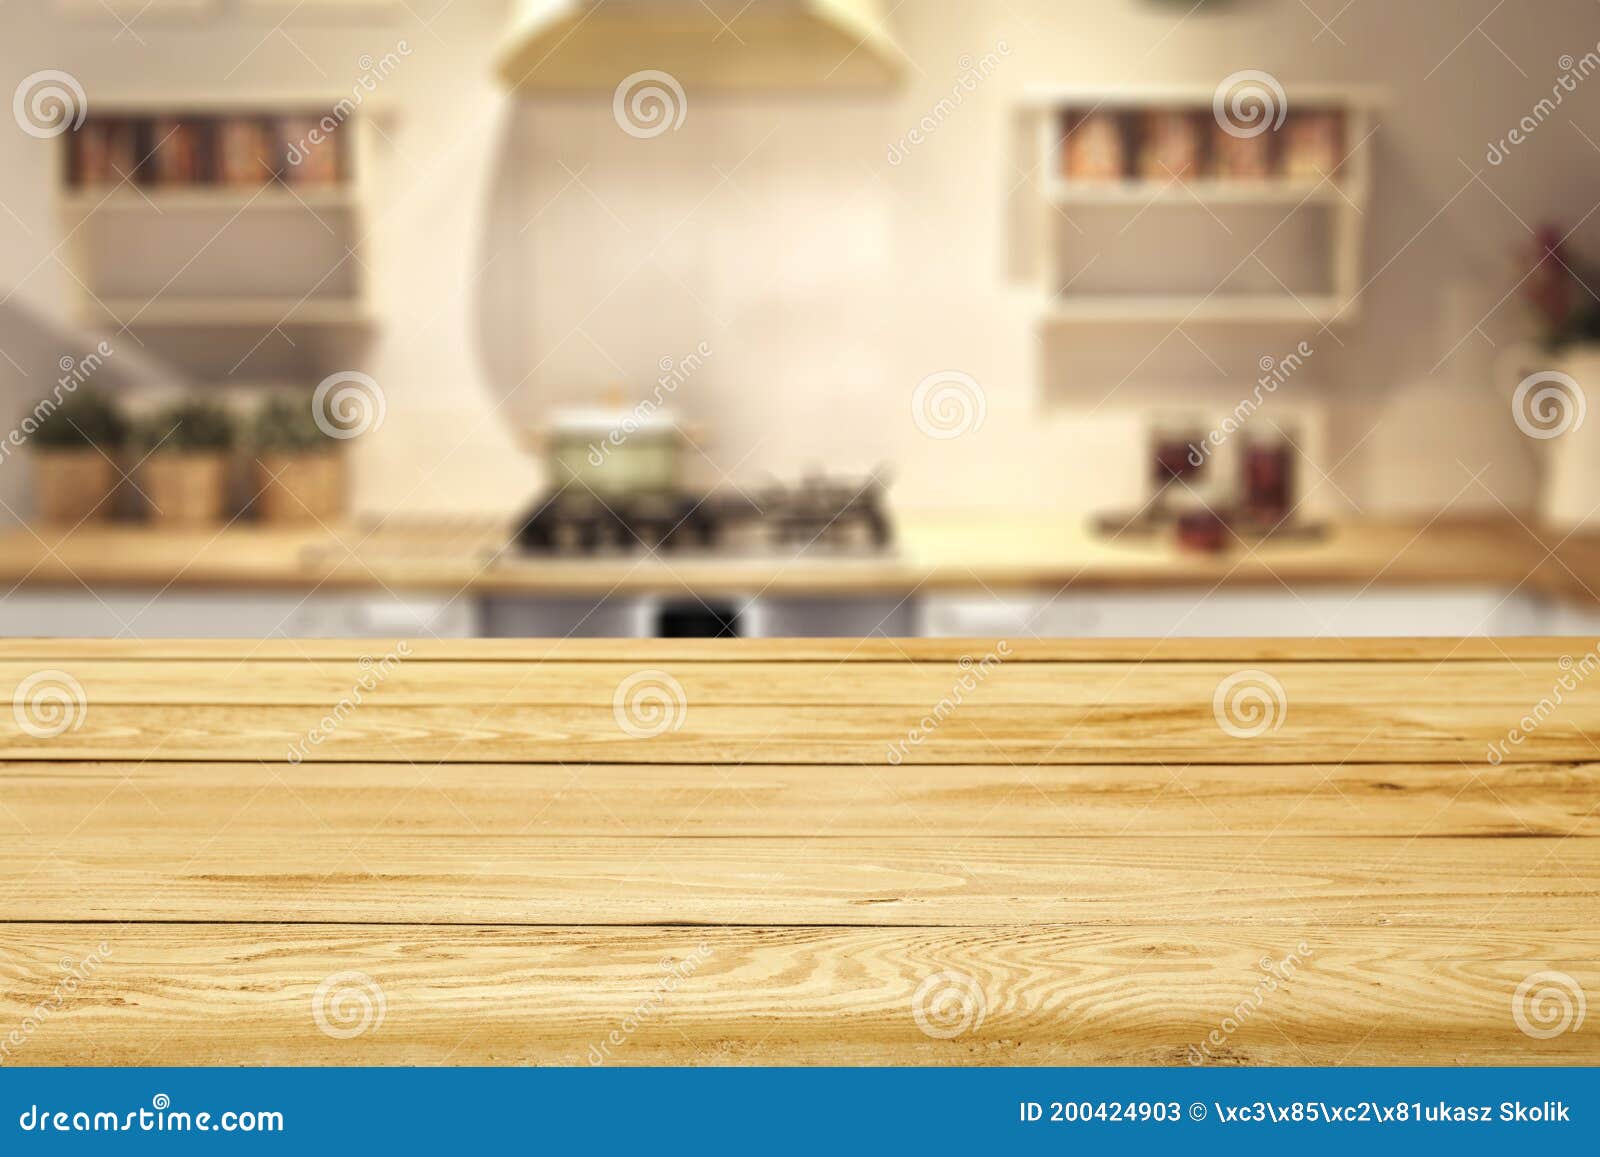 Wooden Table Background with Free Space for Products, Kitchen Interior ...